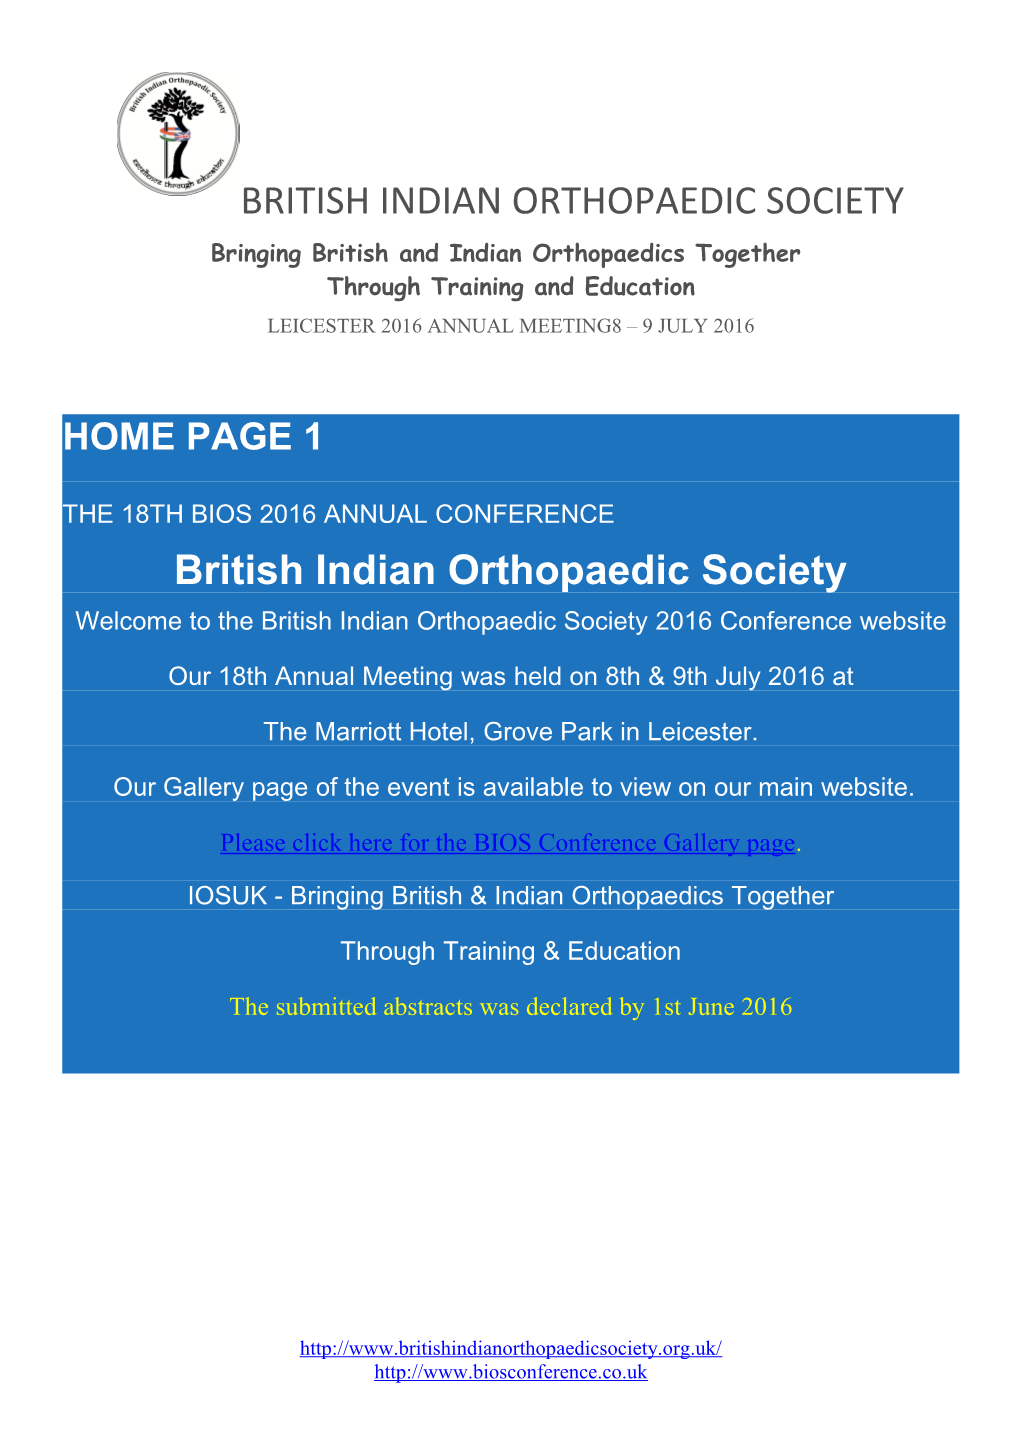 The 18Th Bios 2016 Annual Conference